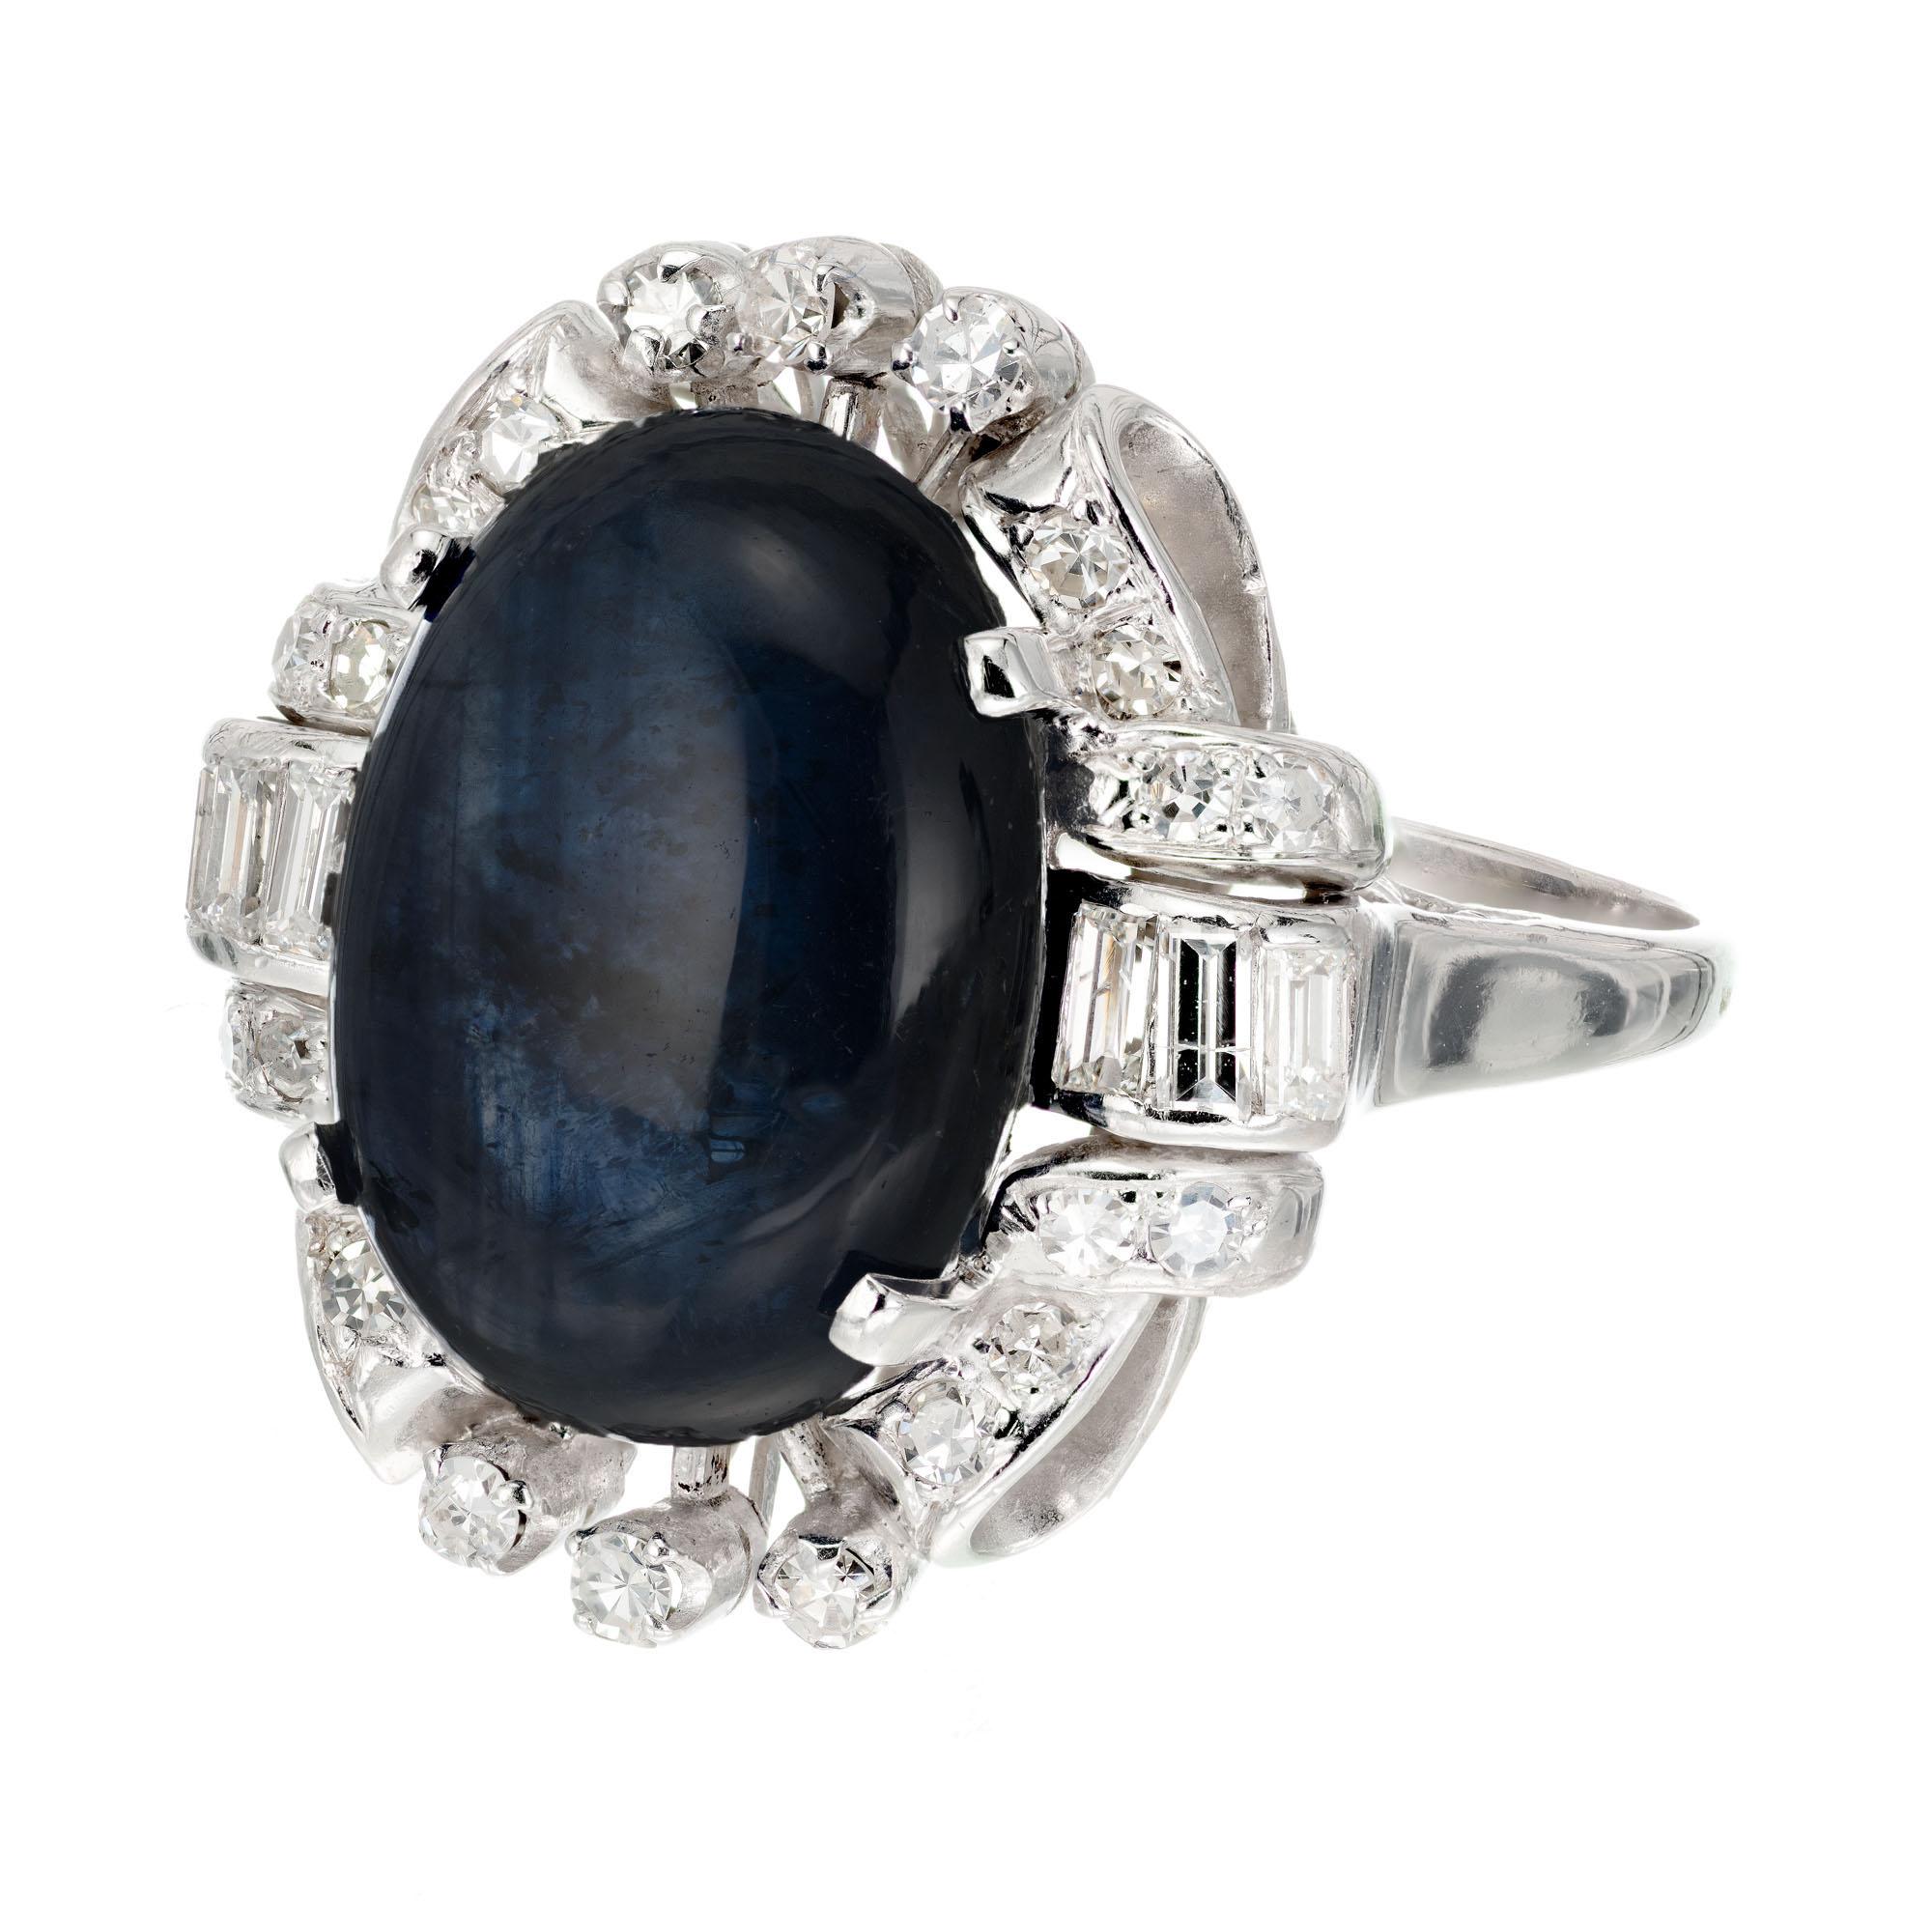 10.33ct oval cabochon sapphire with a halo of 28 mixed shaped diamonds in a handmade 14k white gold setting. Circa 1930.

1 oval cabochon cut sapphire approx. total weight 10.33cts   15.16mm top to bottom of stone and 11.15mm across. Or,  .60 inch